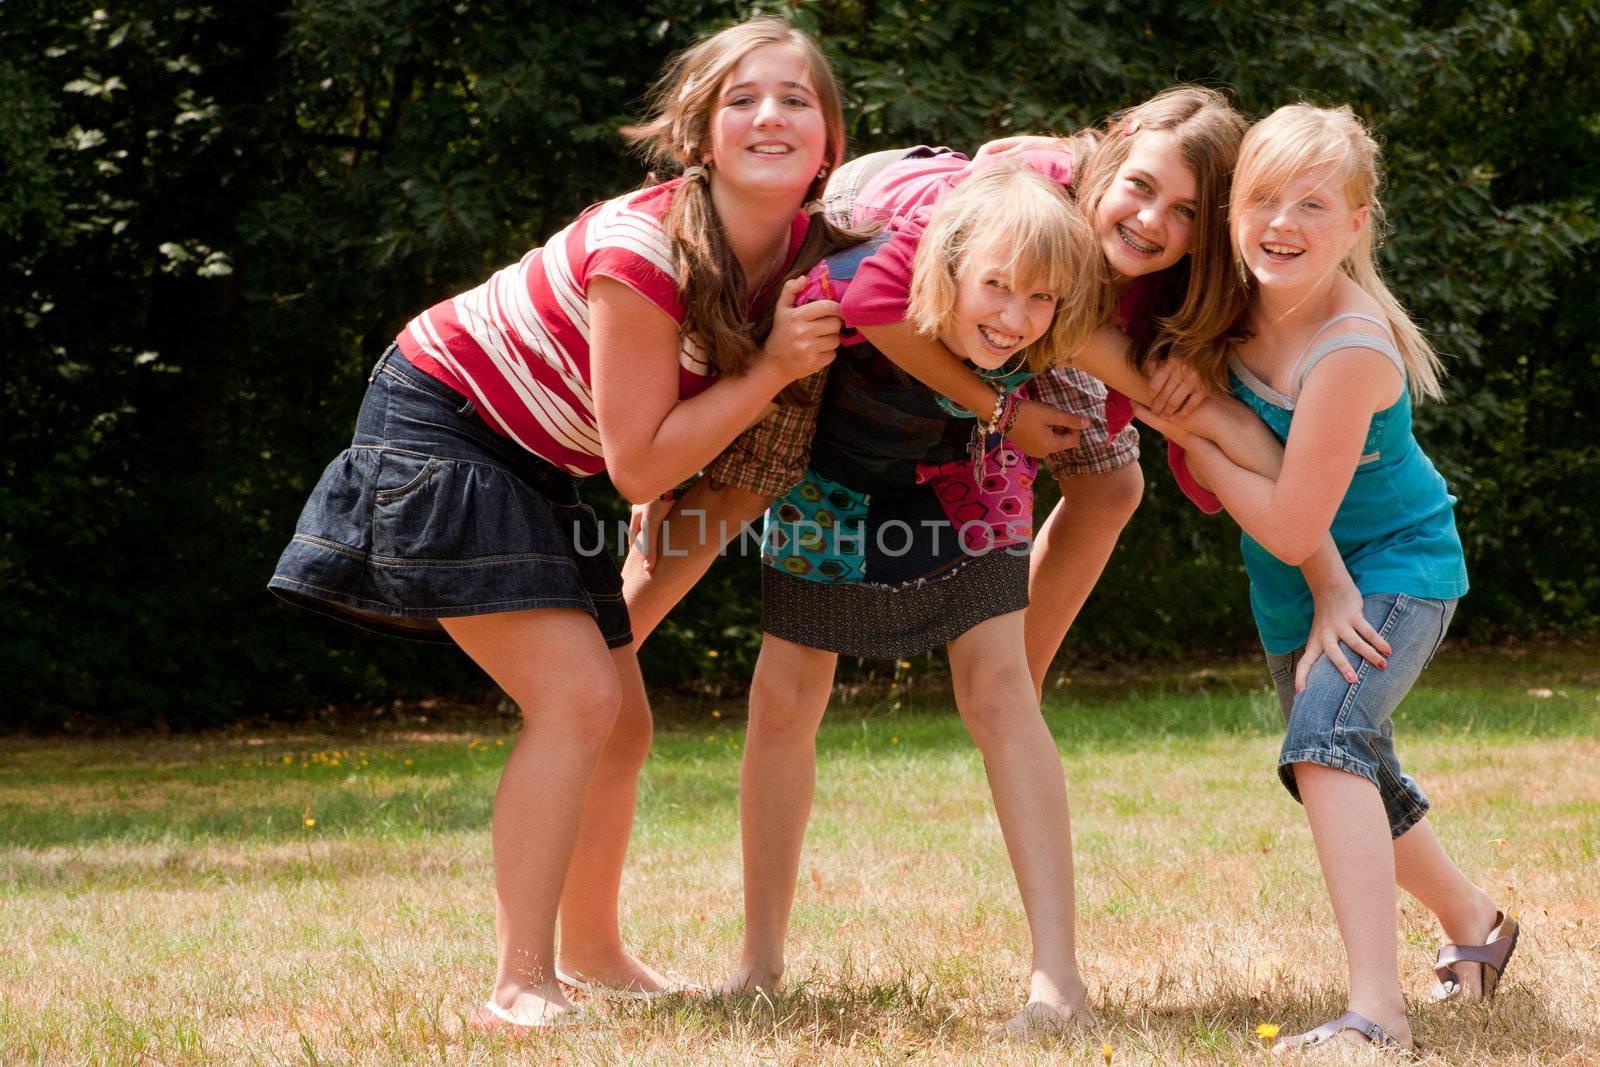 Group of young girls are having fun